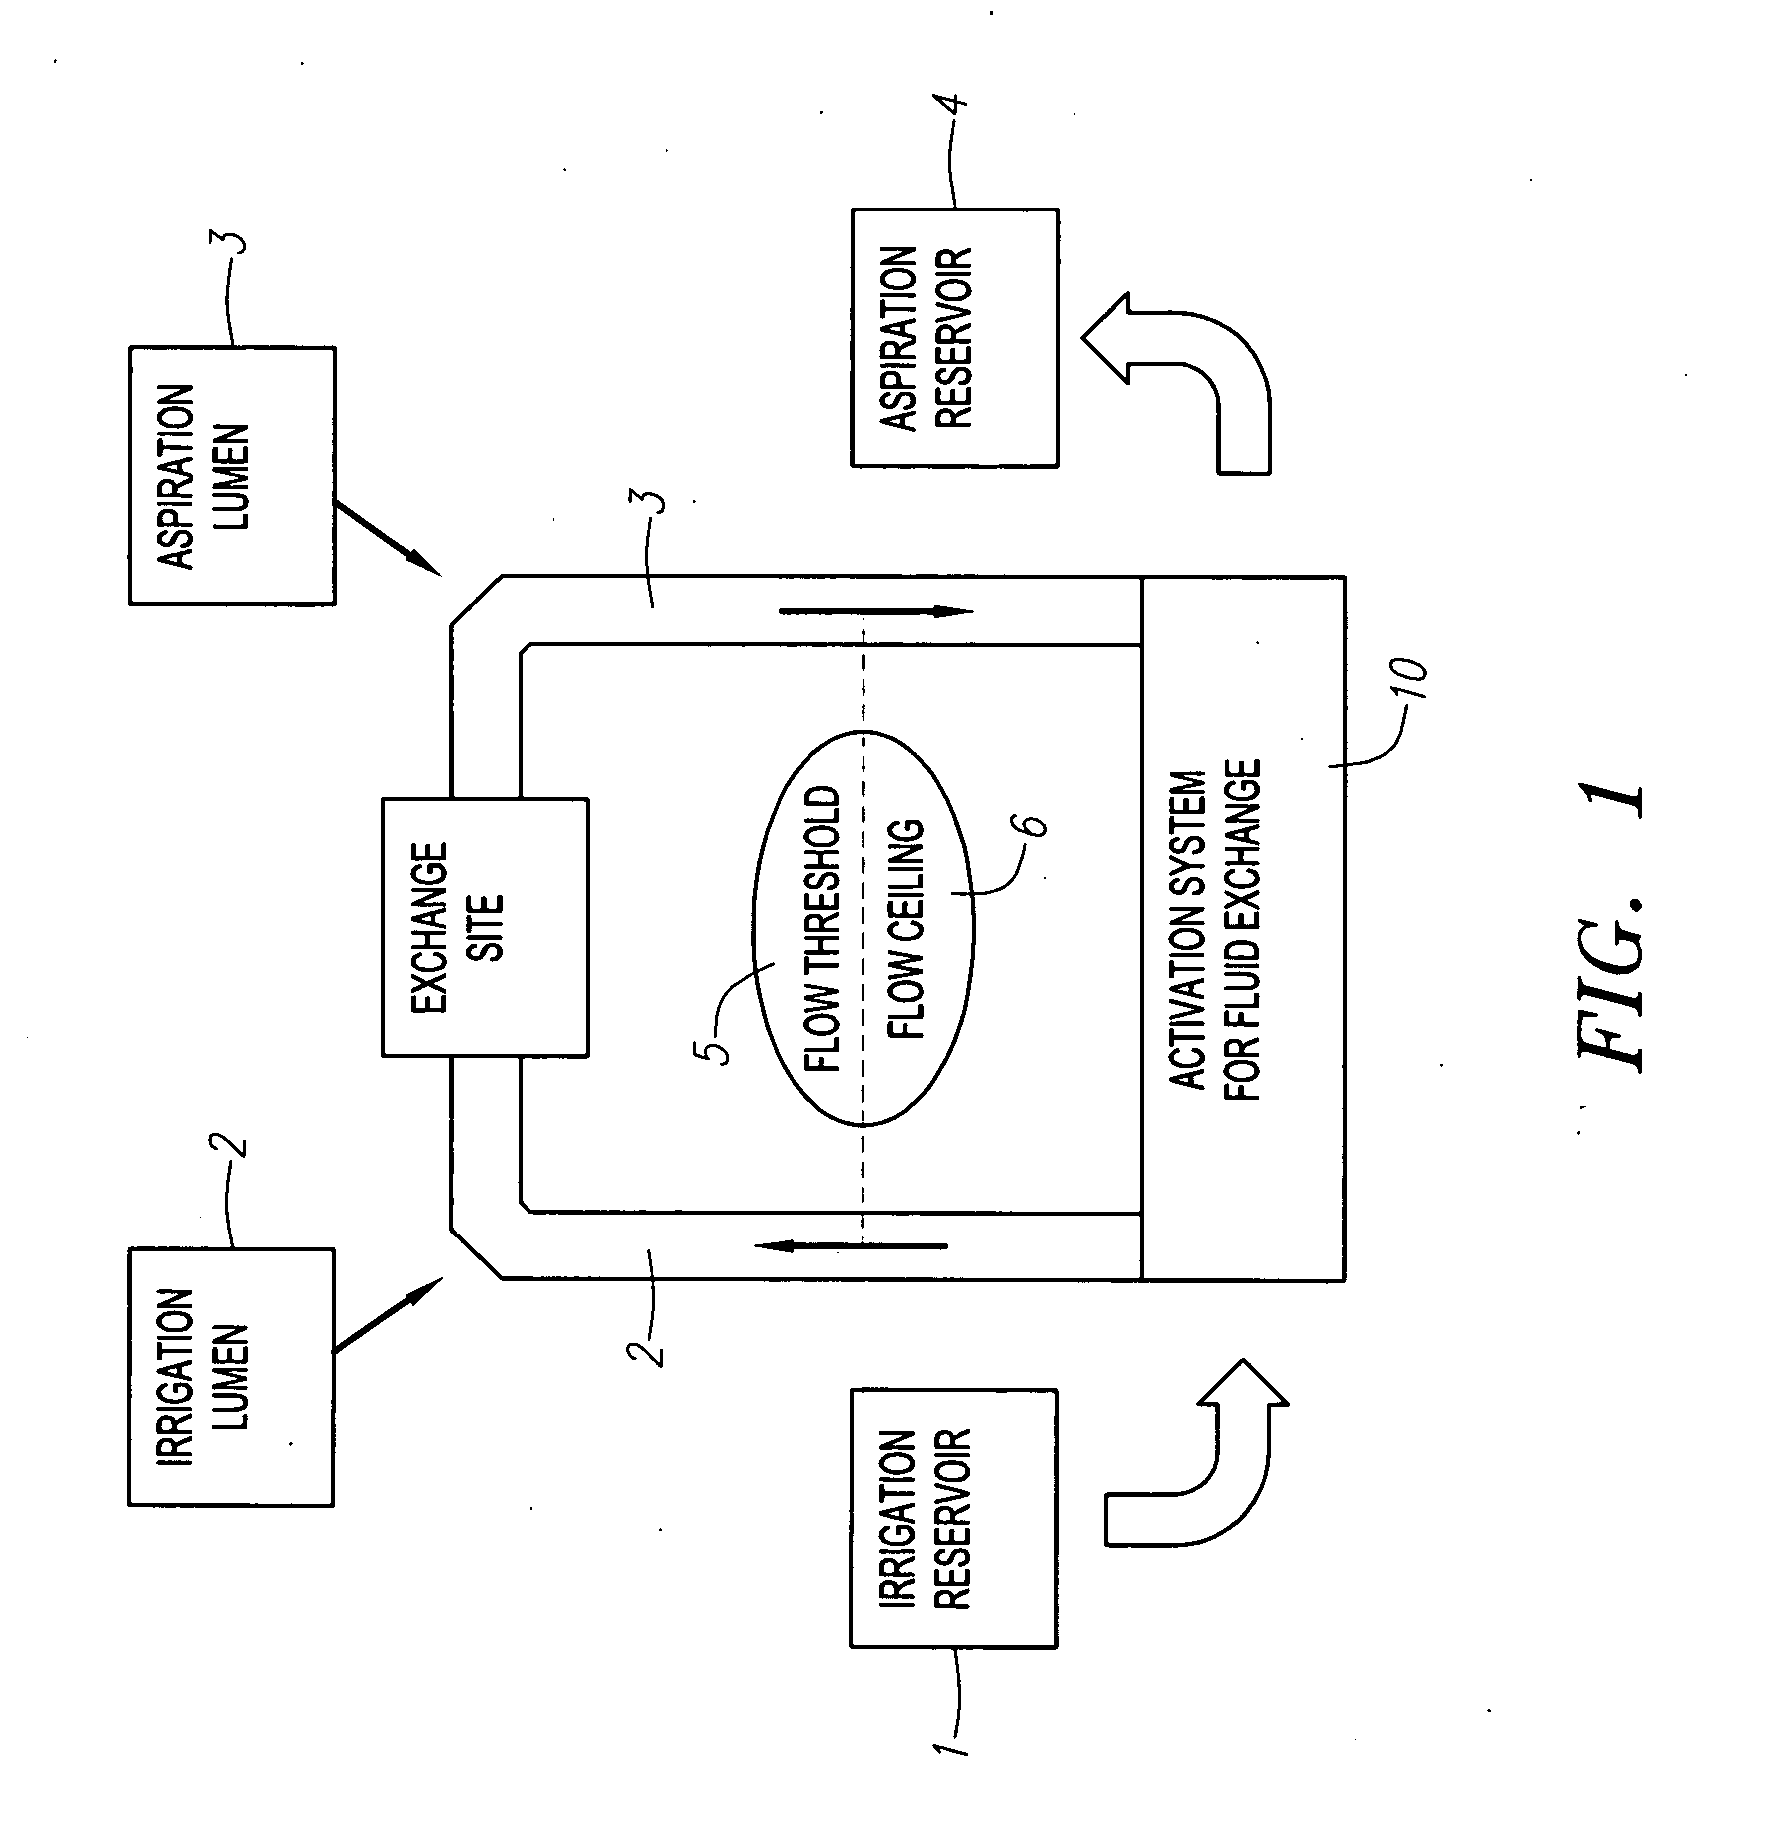 Fluid exchange system for controlled and localized irrigation and aspiration